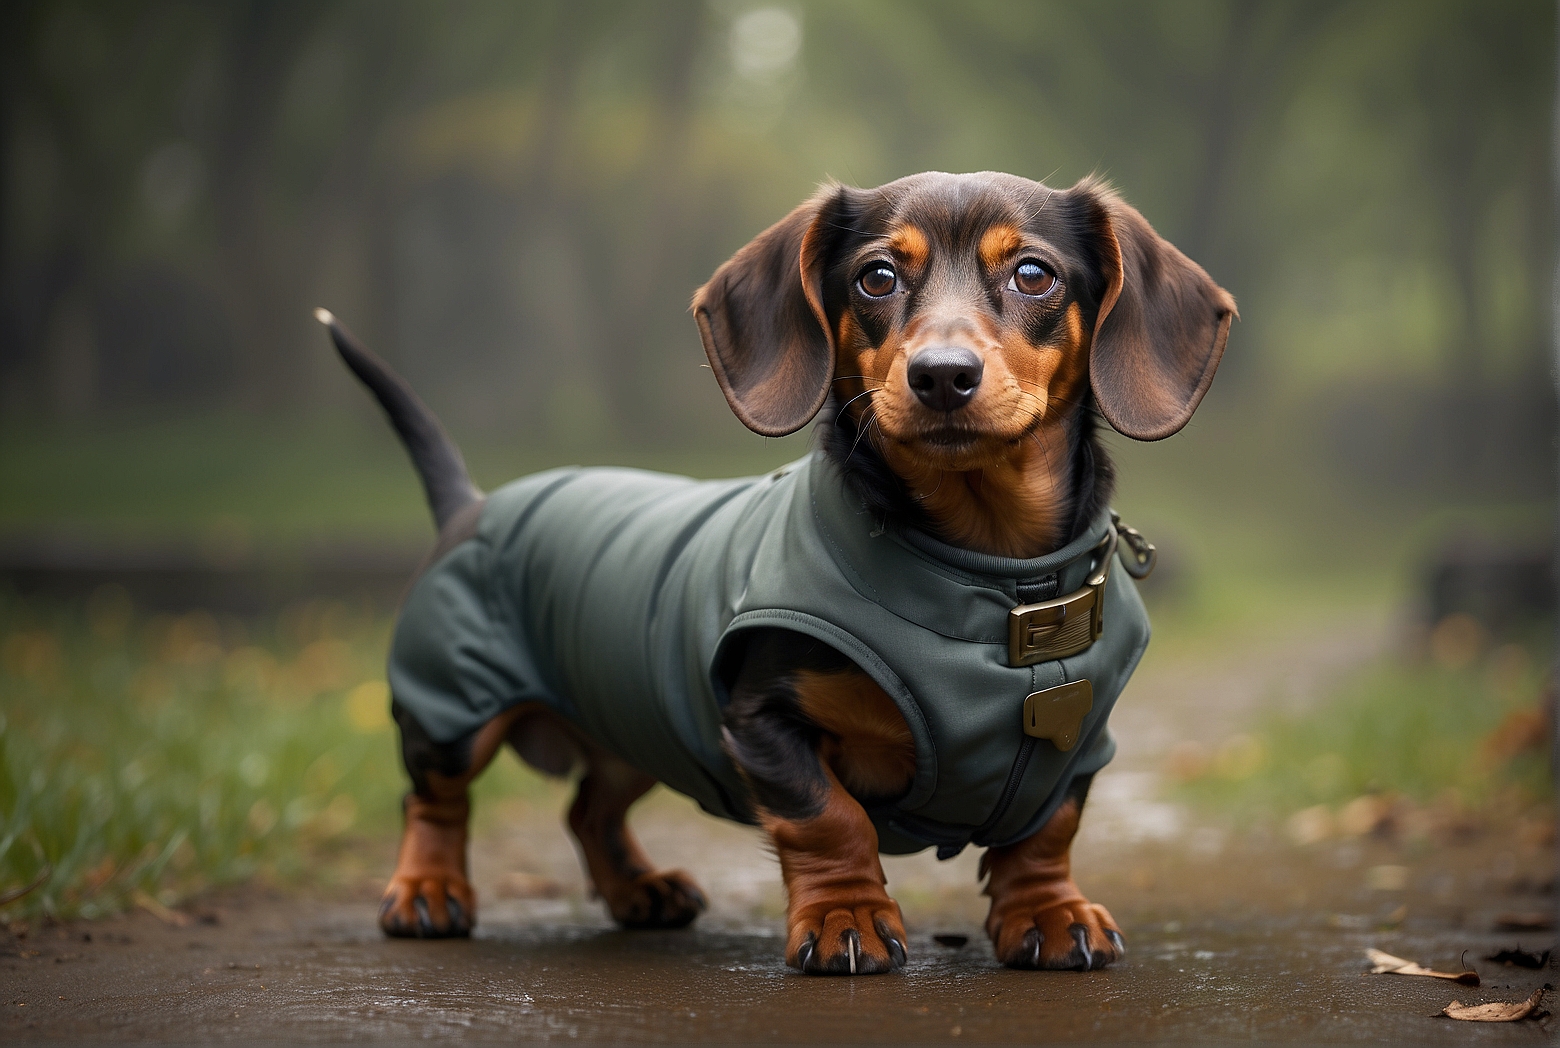 Can You Train A Dachshund To Be A Guard Dog